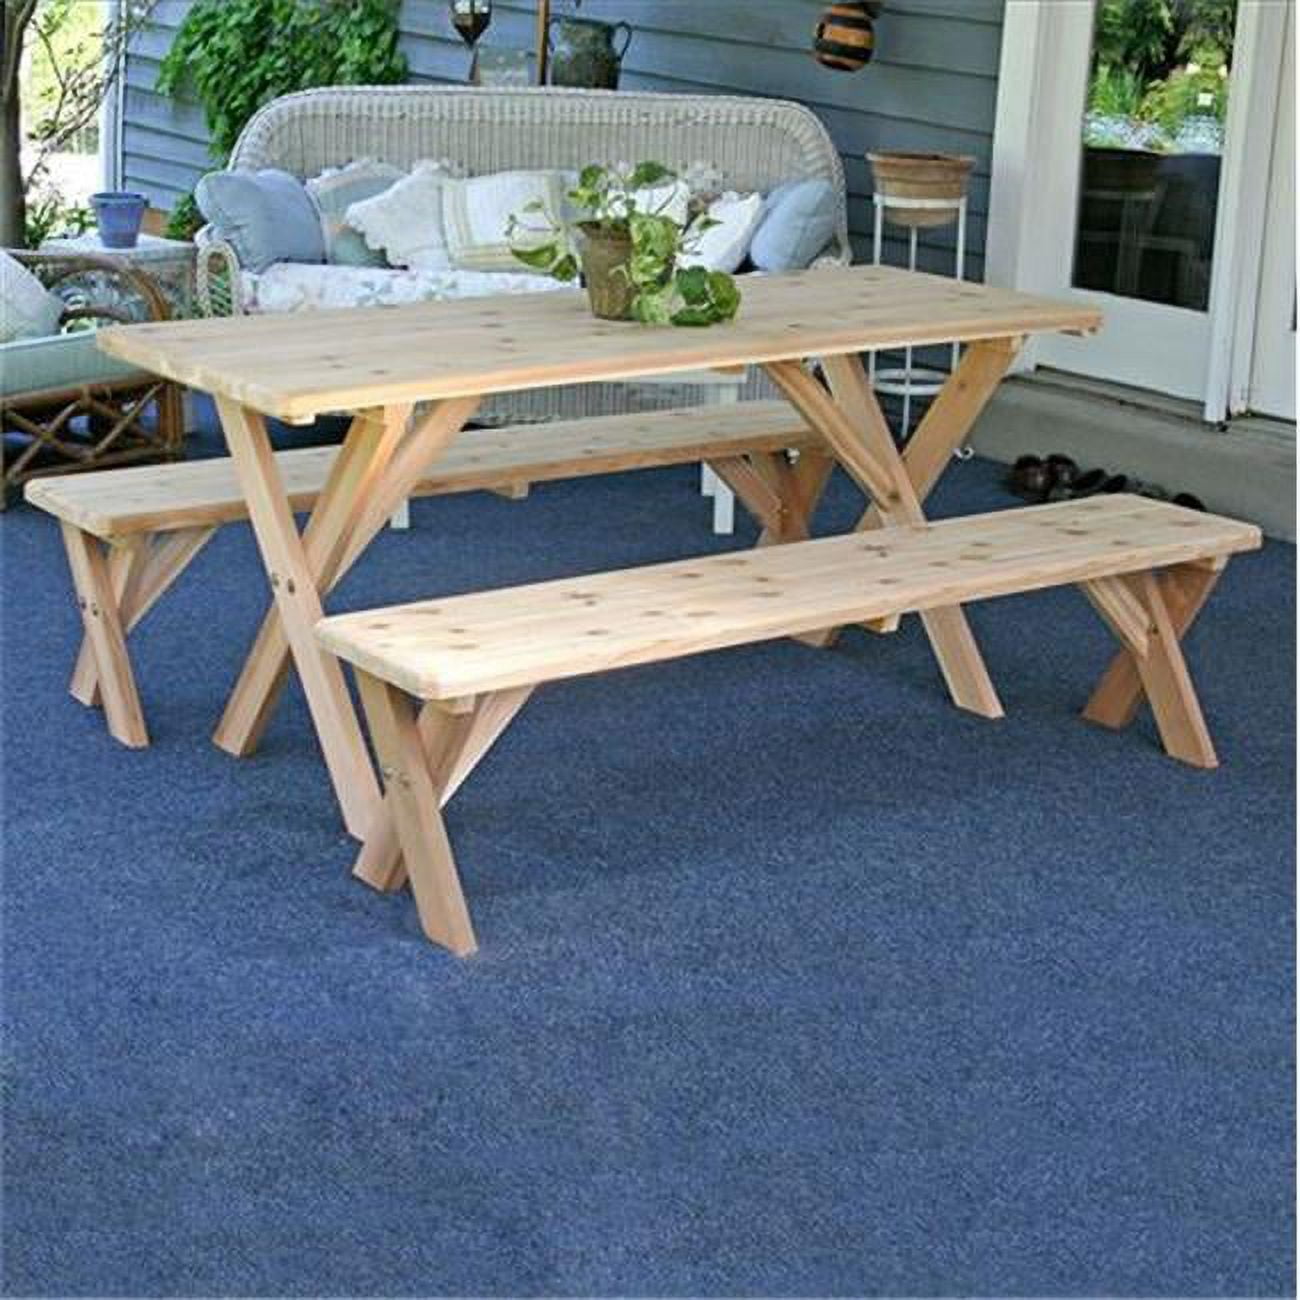 27 In. X 5 Ft. Red Cedar Backyard Bash Cross Legged Picnic Table With Detached Benches